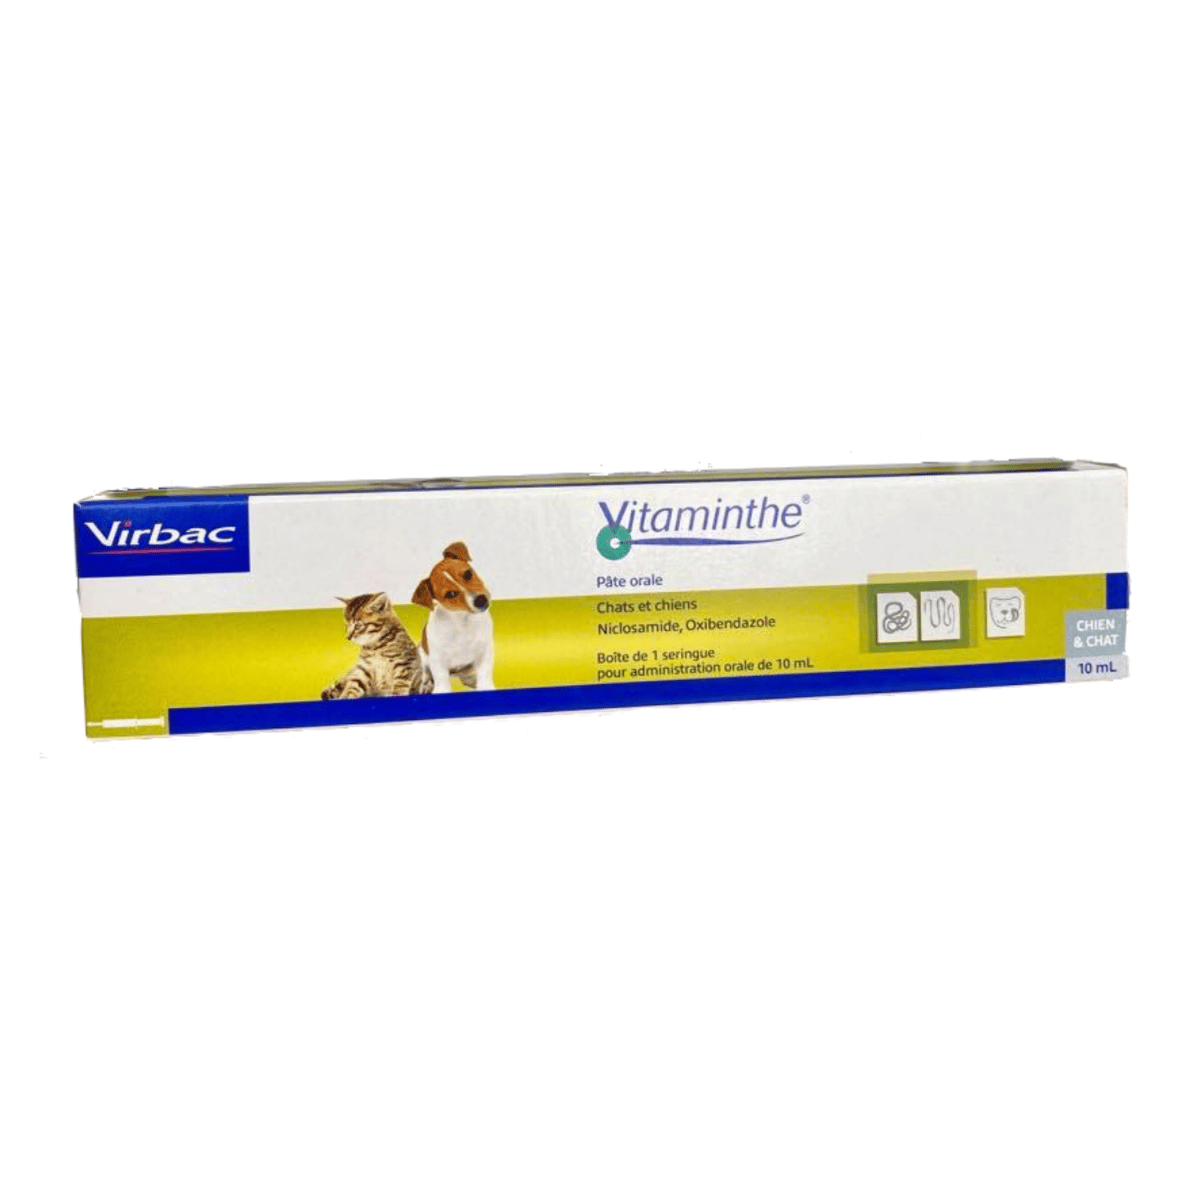 vitaminthe-virbac-10-ml-ontworming